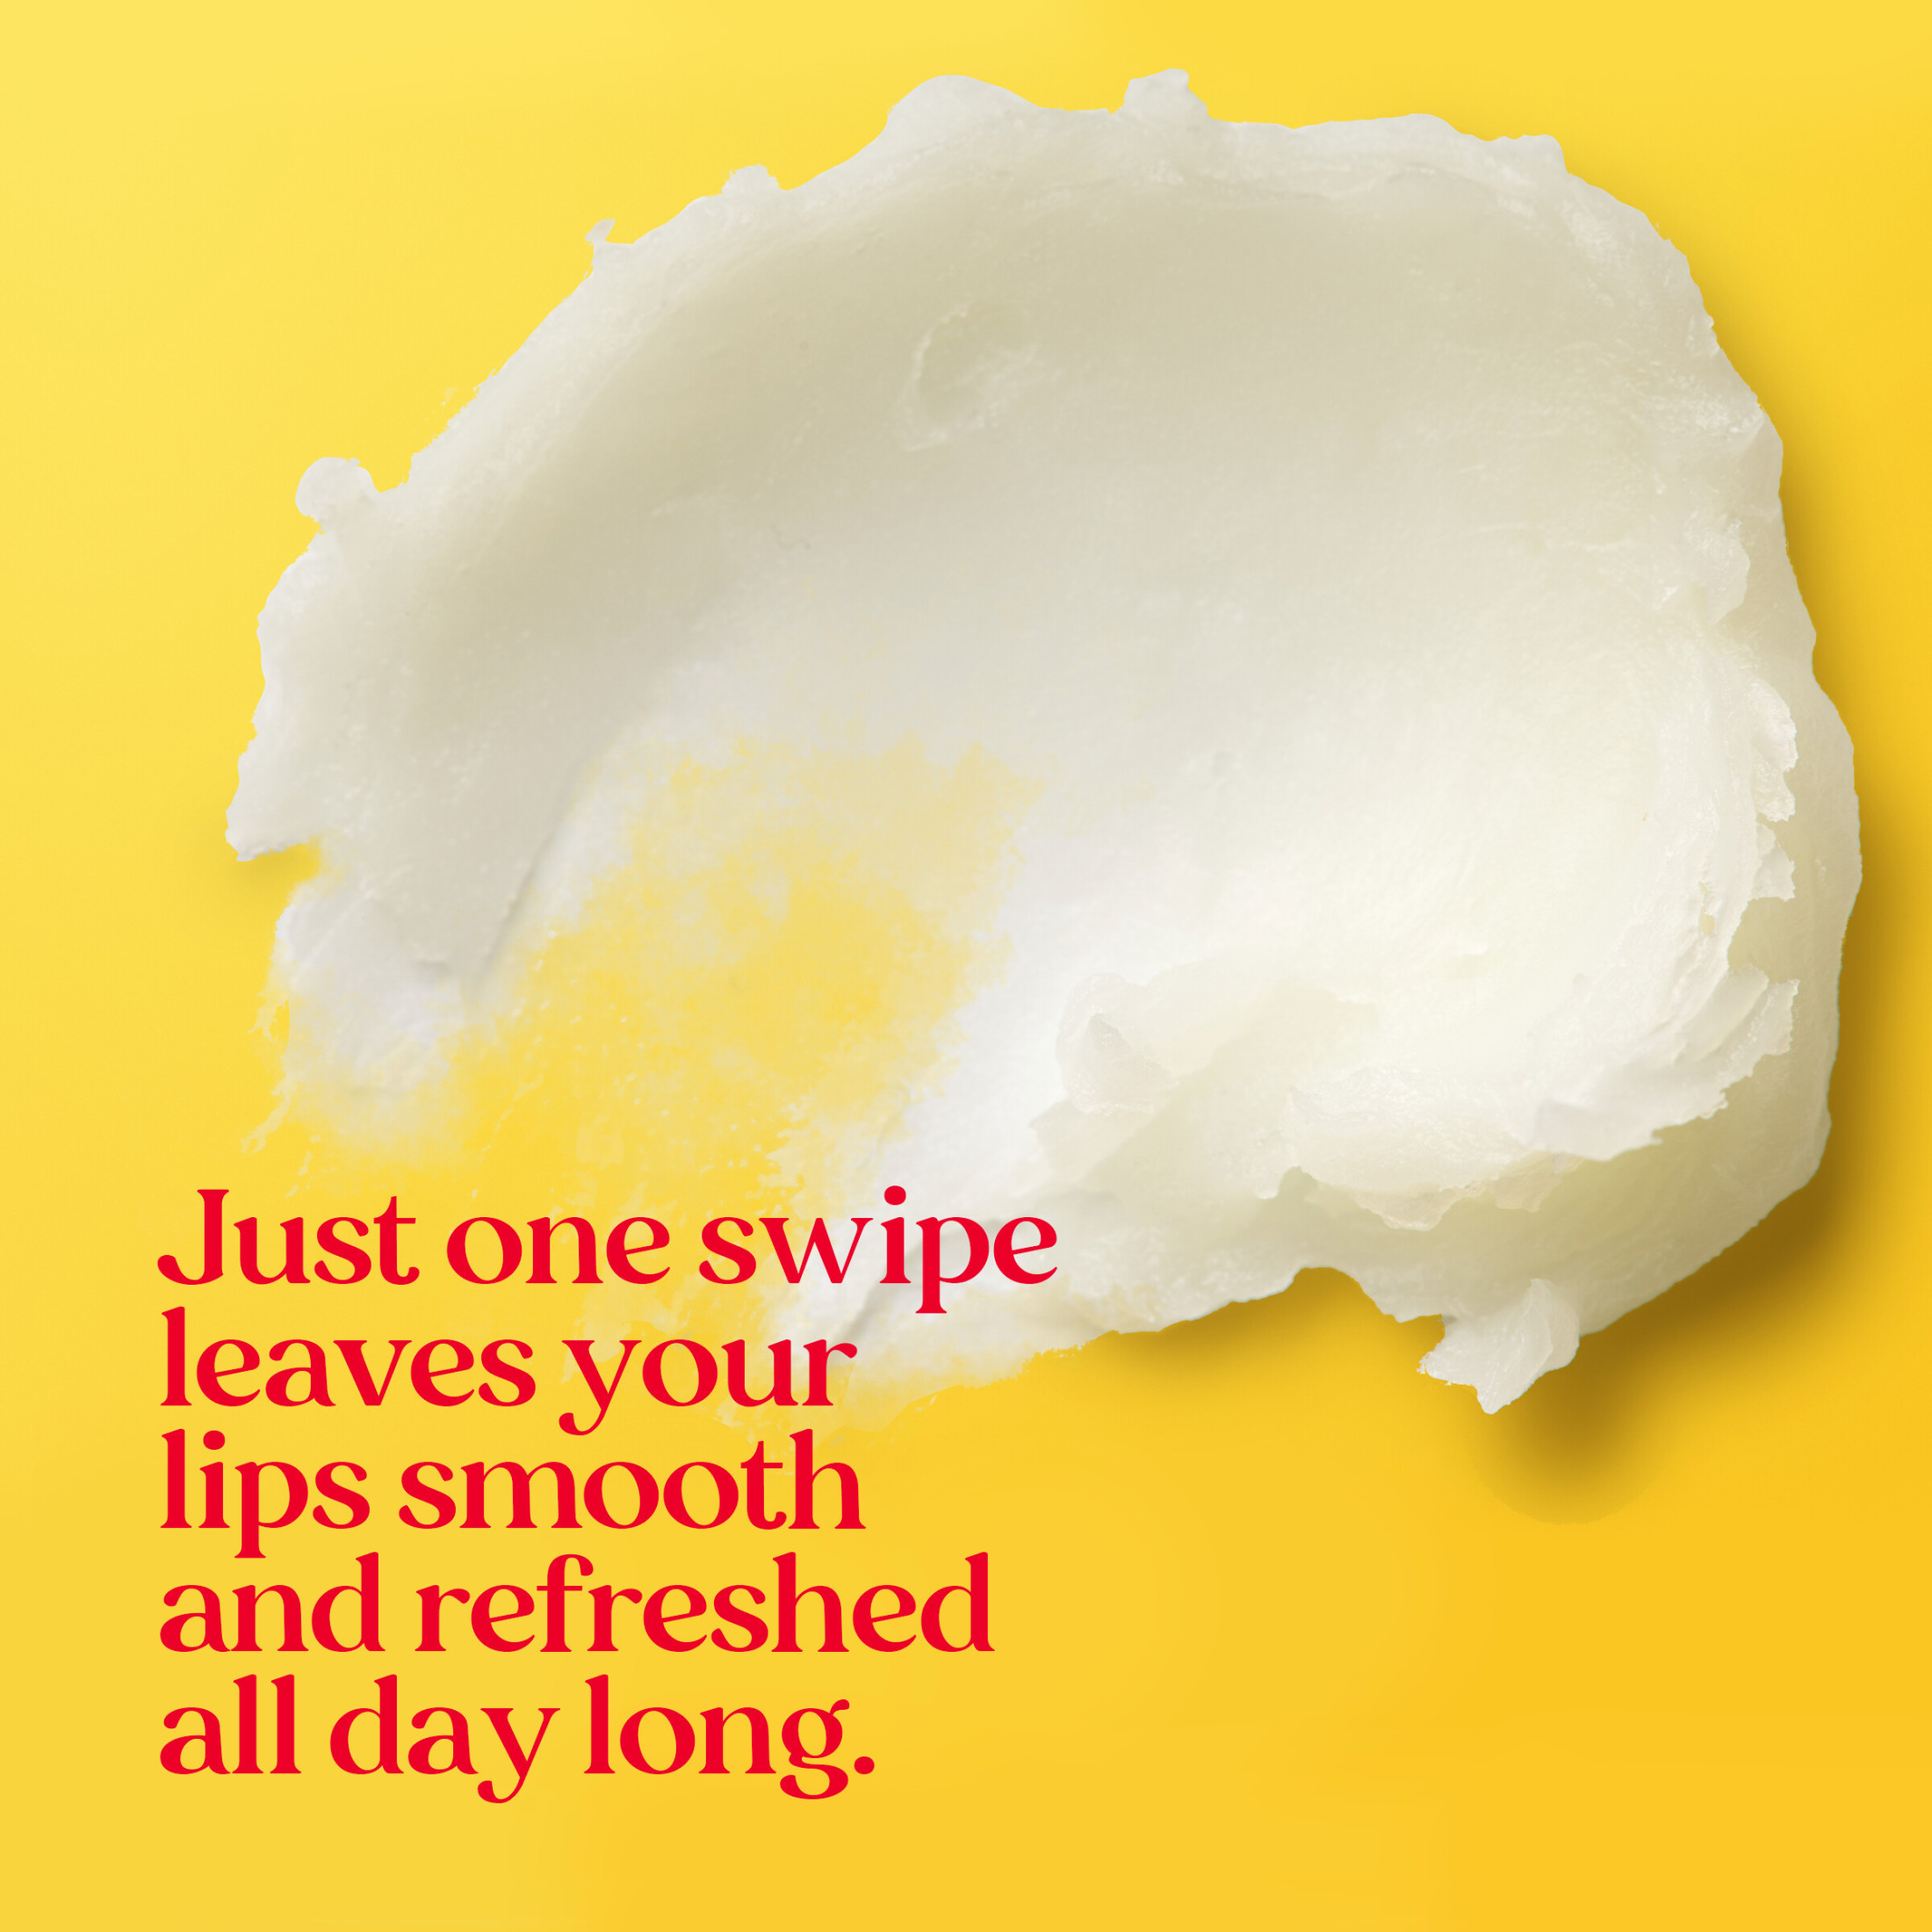 Burt's Bees 100% Natural Origin Moisturizing Lip Balm, with Beeswax, Vitamin E & Peppermint Oil, 3 Tubes - image 4 of 16